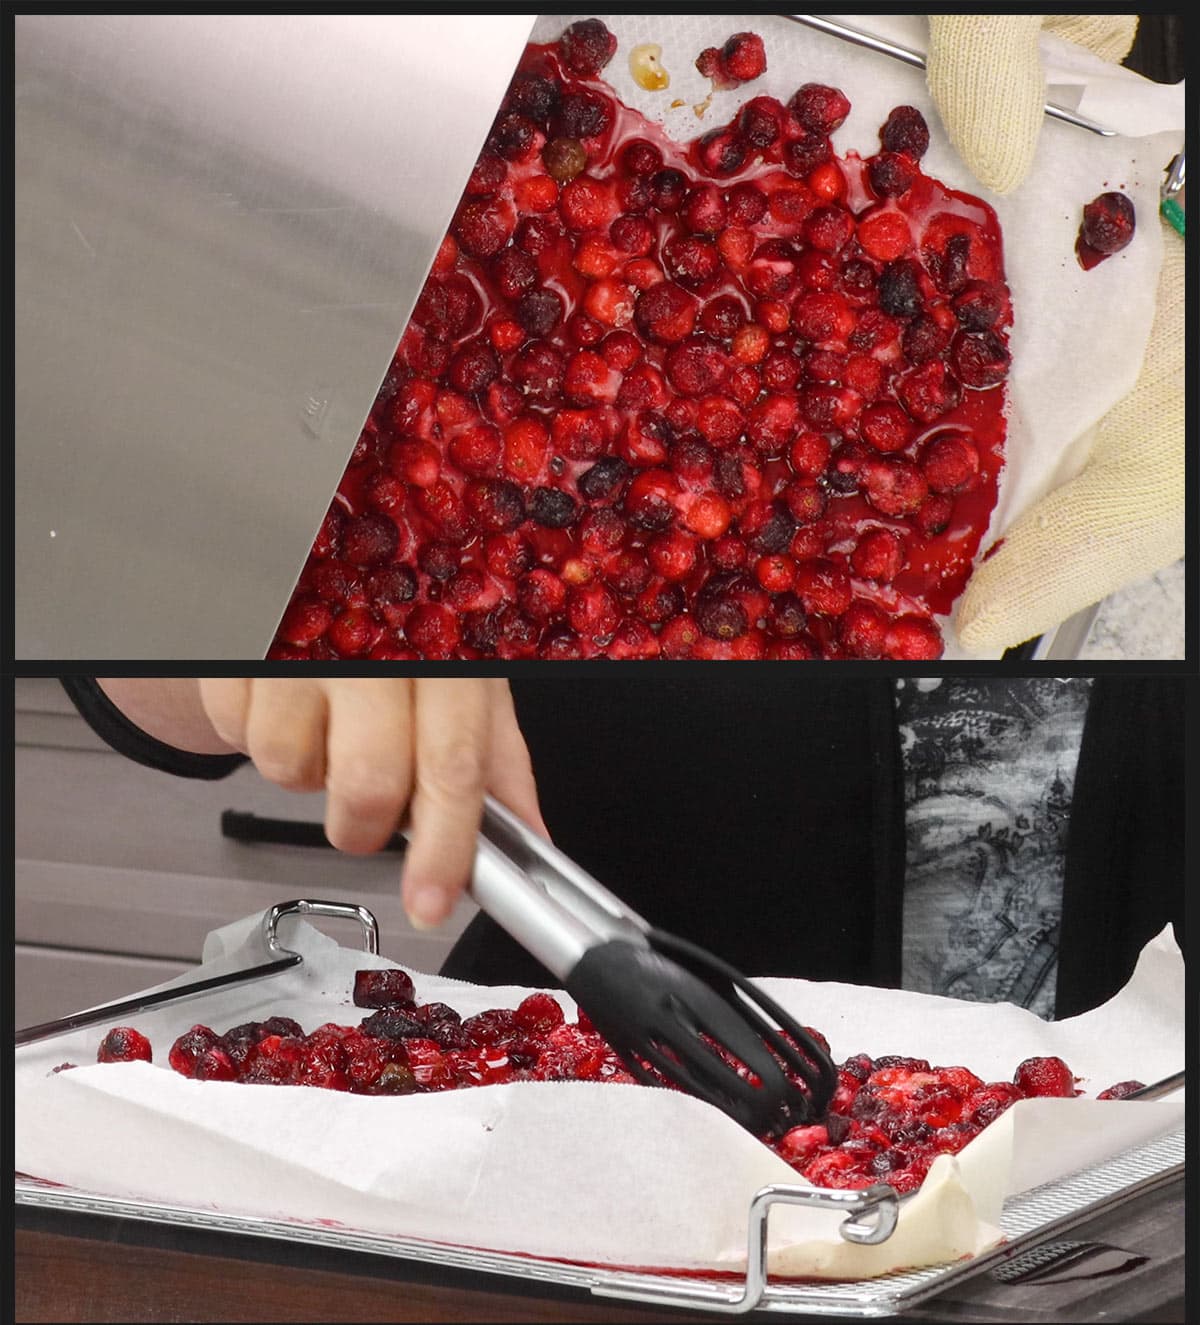 tossing cranberries after baking.